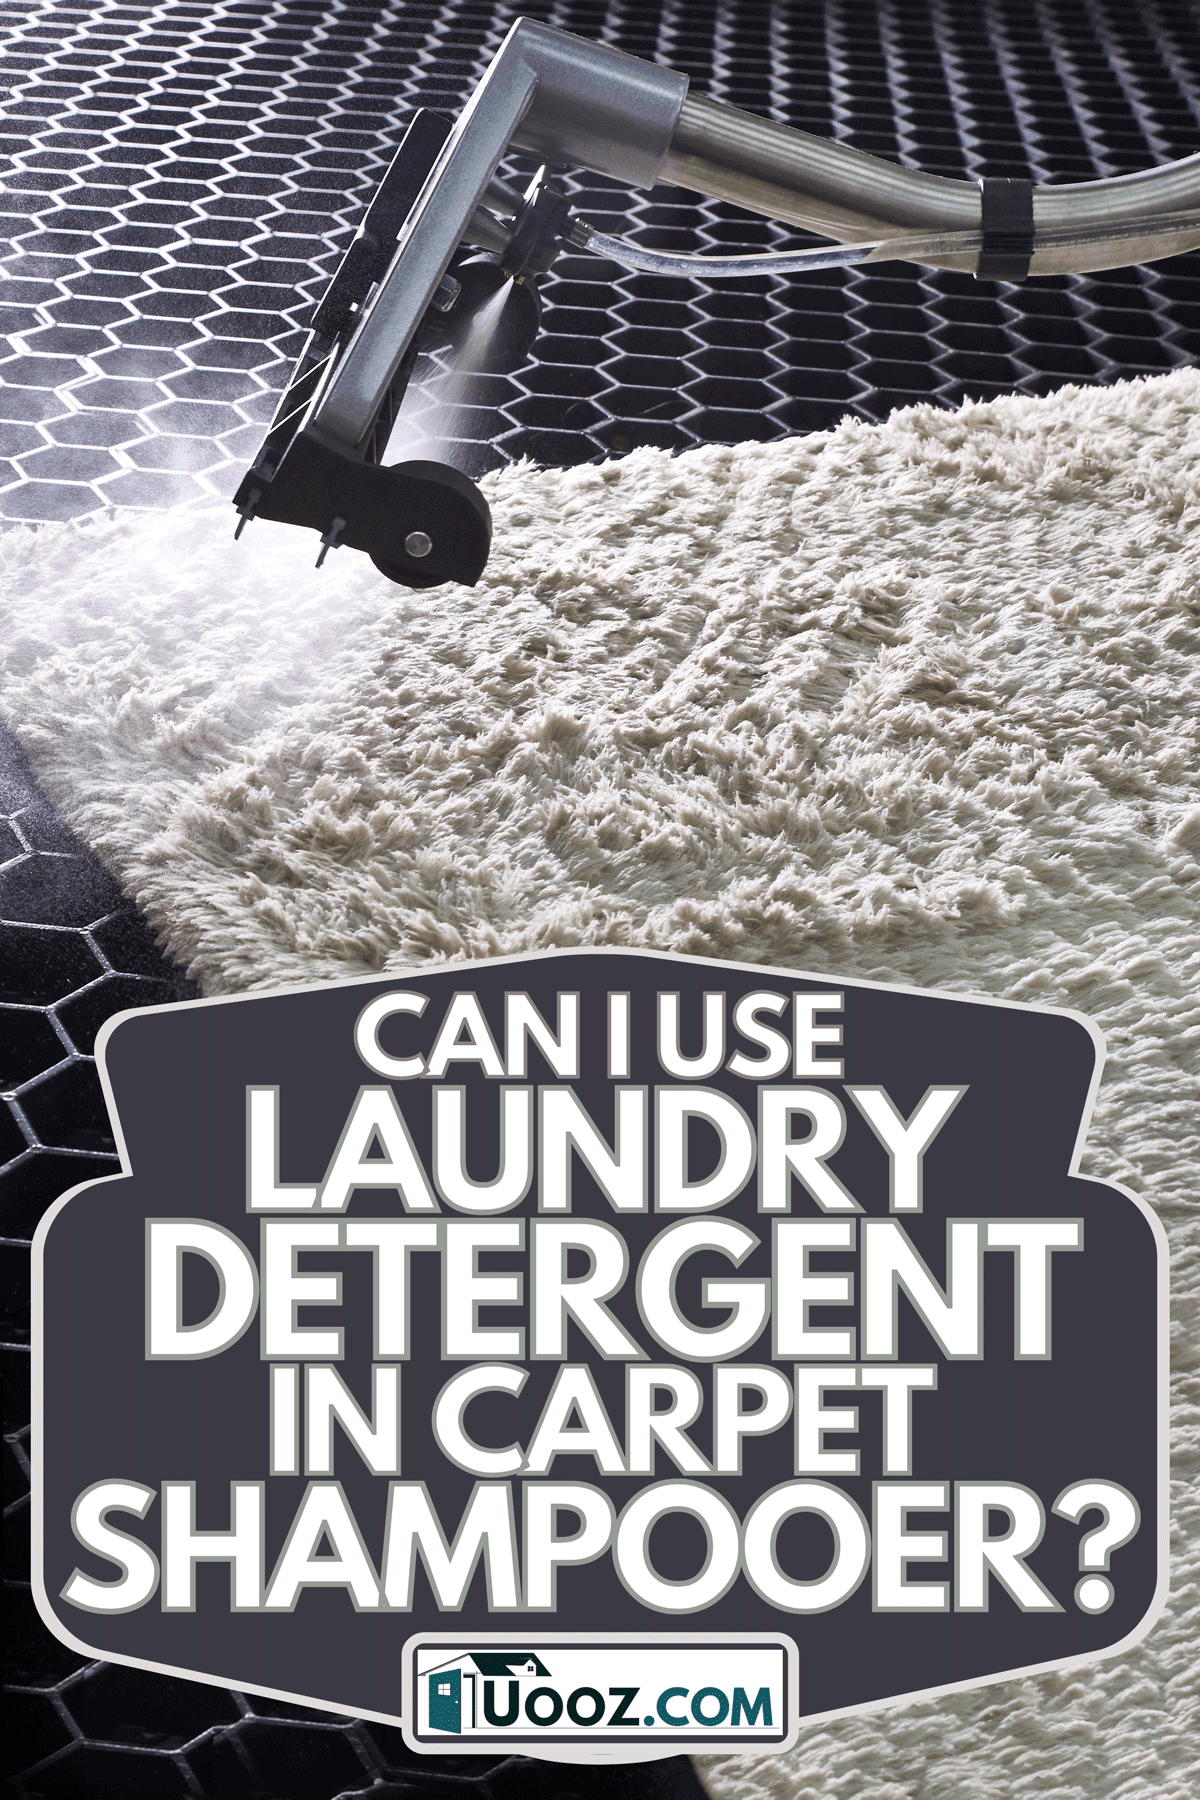 A carpet chemical cleaning with professionally extraction method, Can I Use Laundry Detergent In Carpet Shampooer?